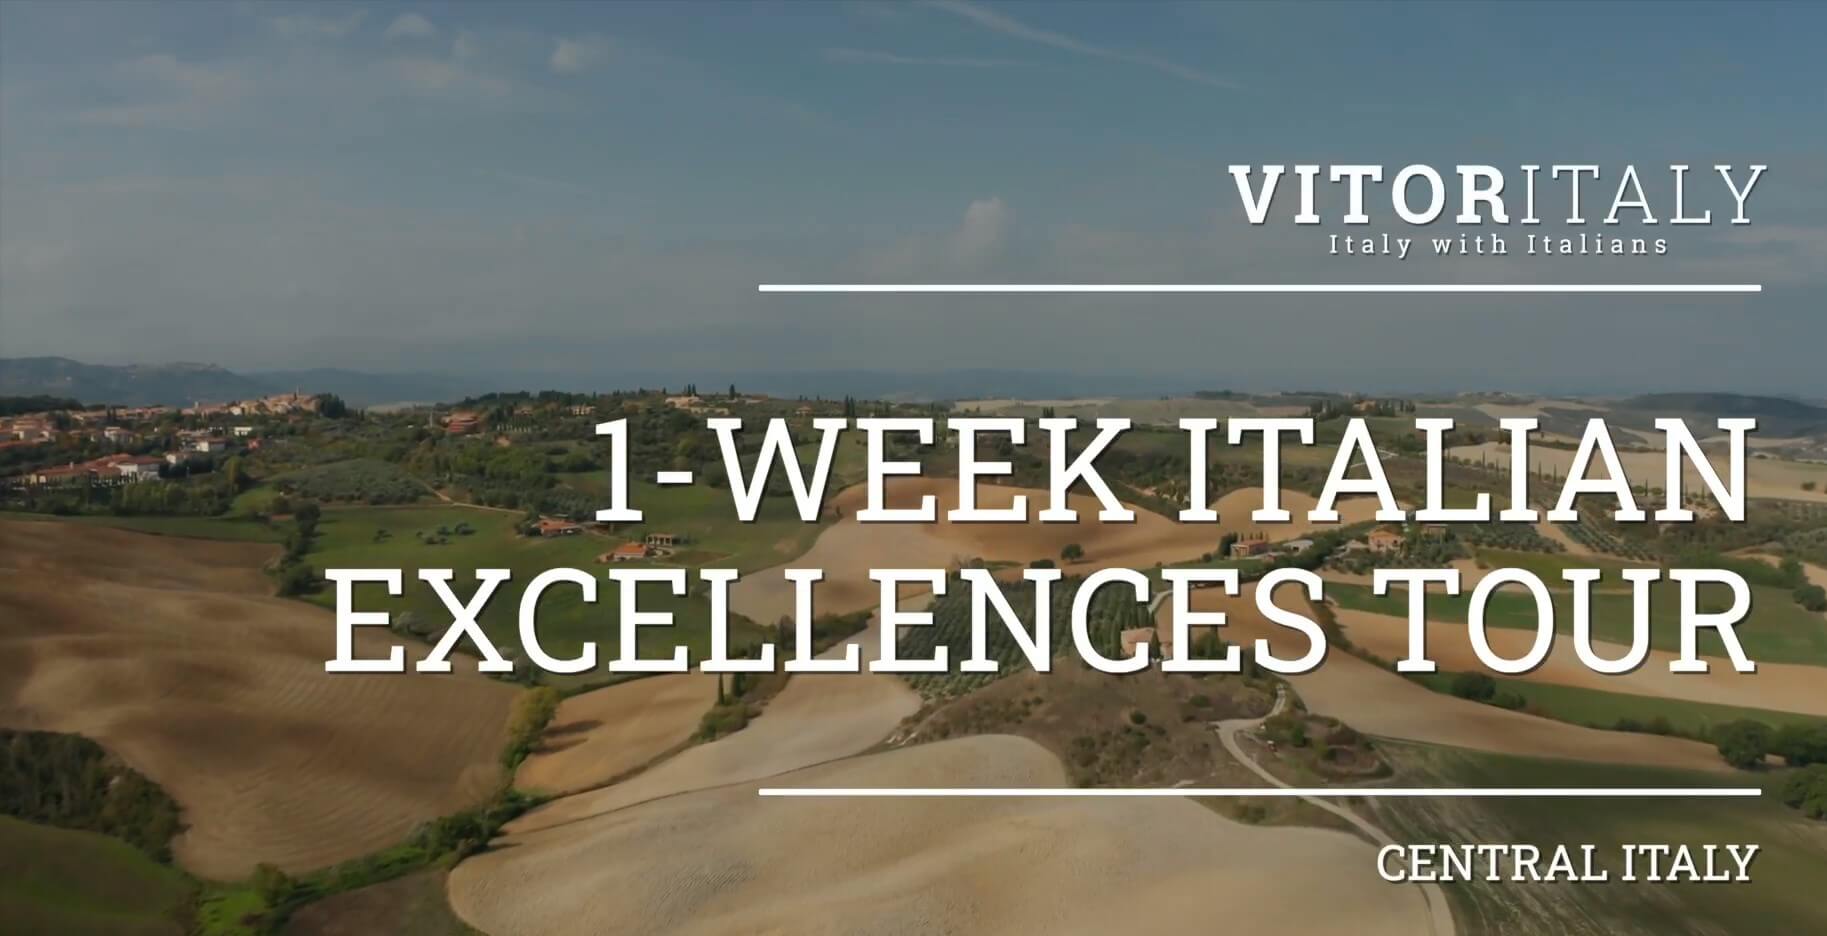 1-WEEK ITALIAN EXCELLENCES TOUR - Central Italy